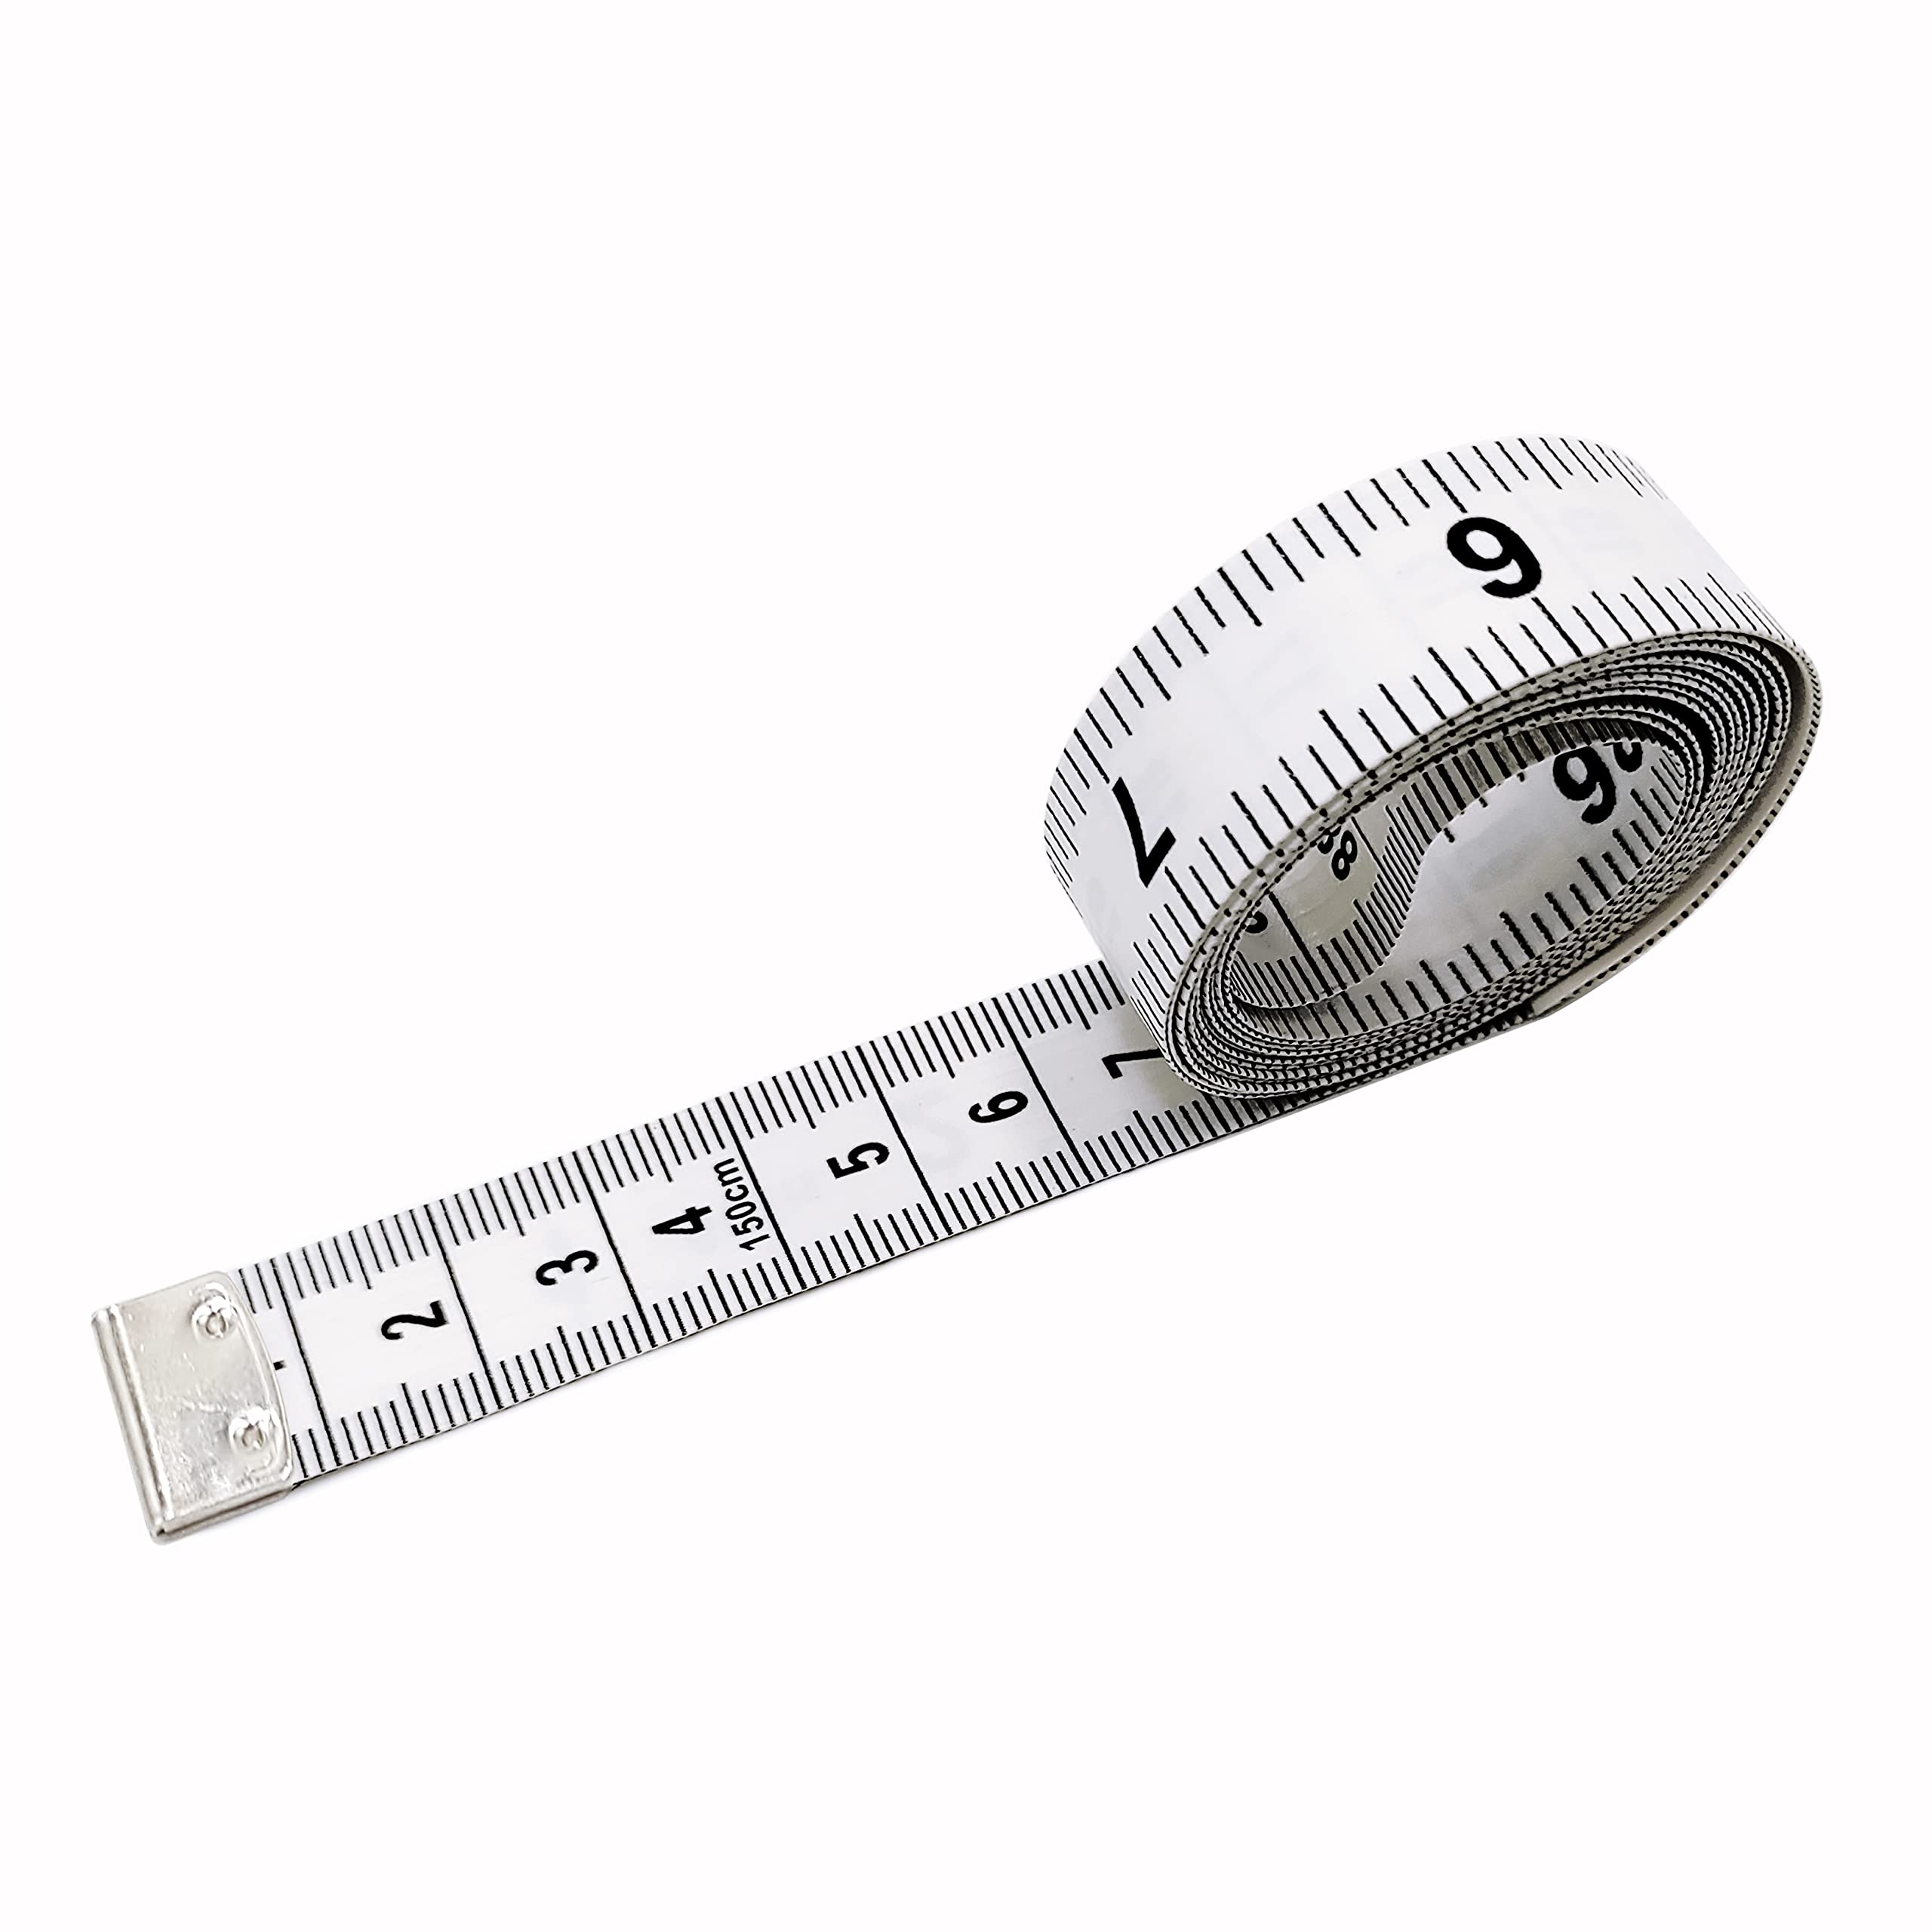  eBoot 60 Inch 150 cm Soft Tailor Tape Measure for